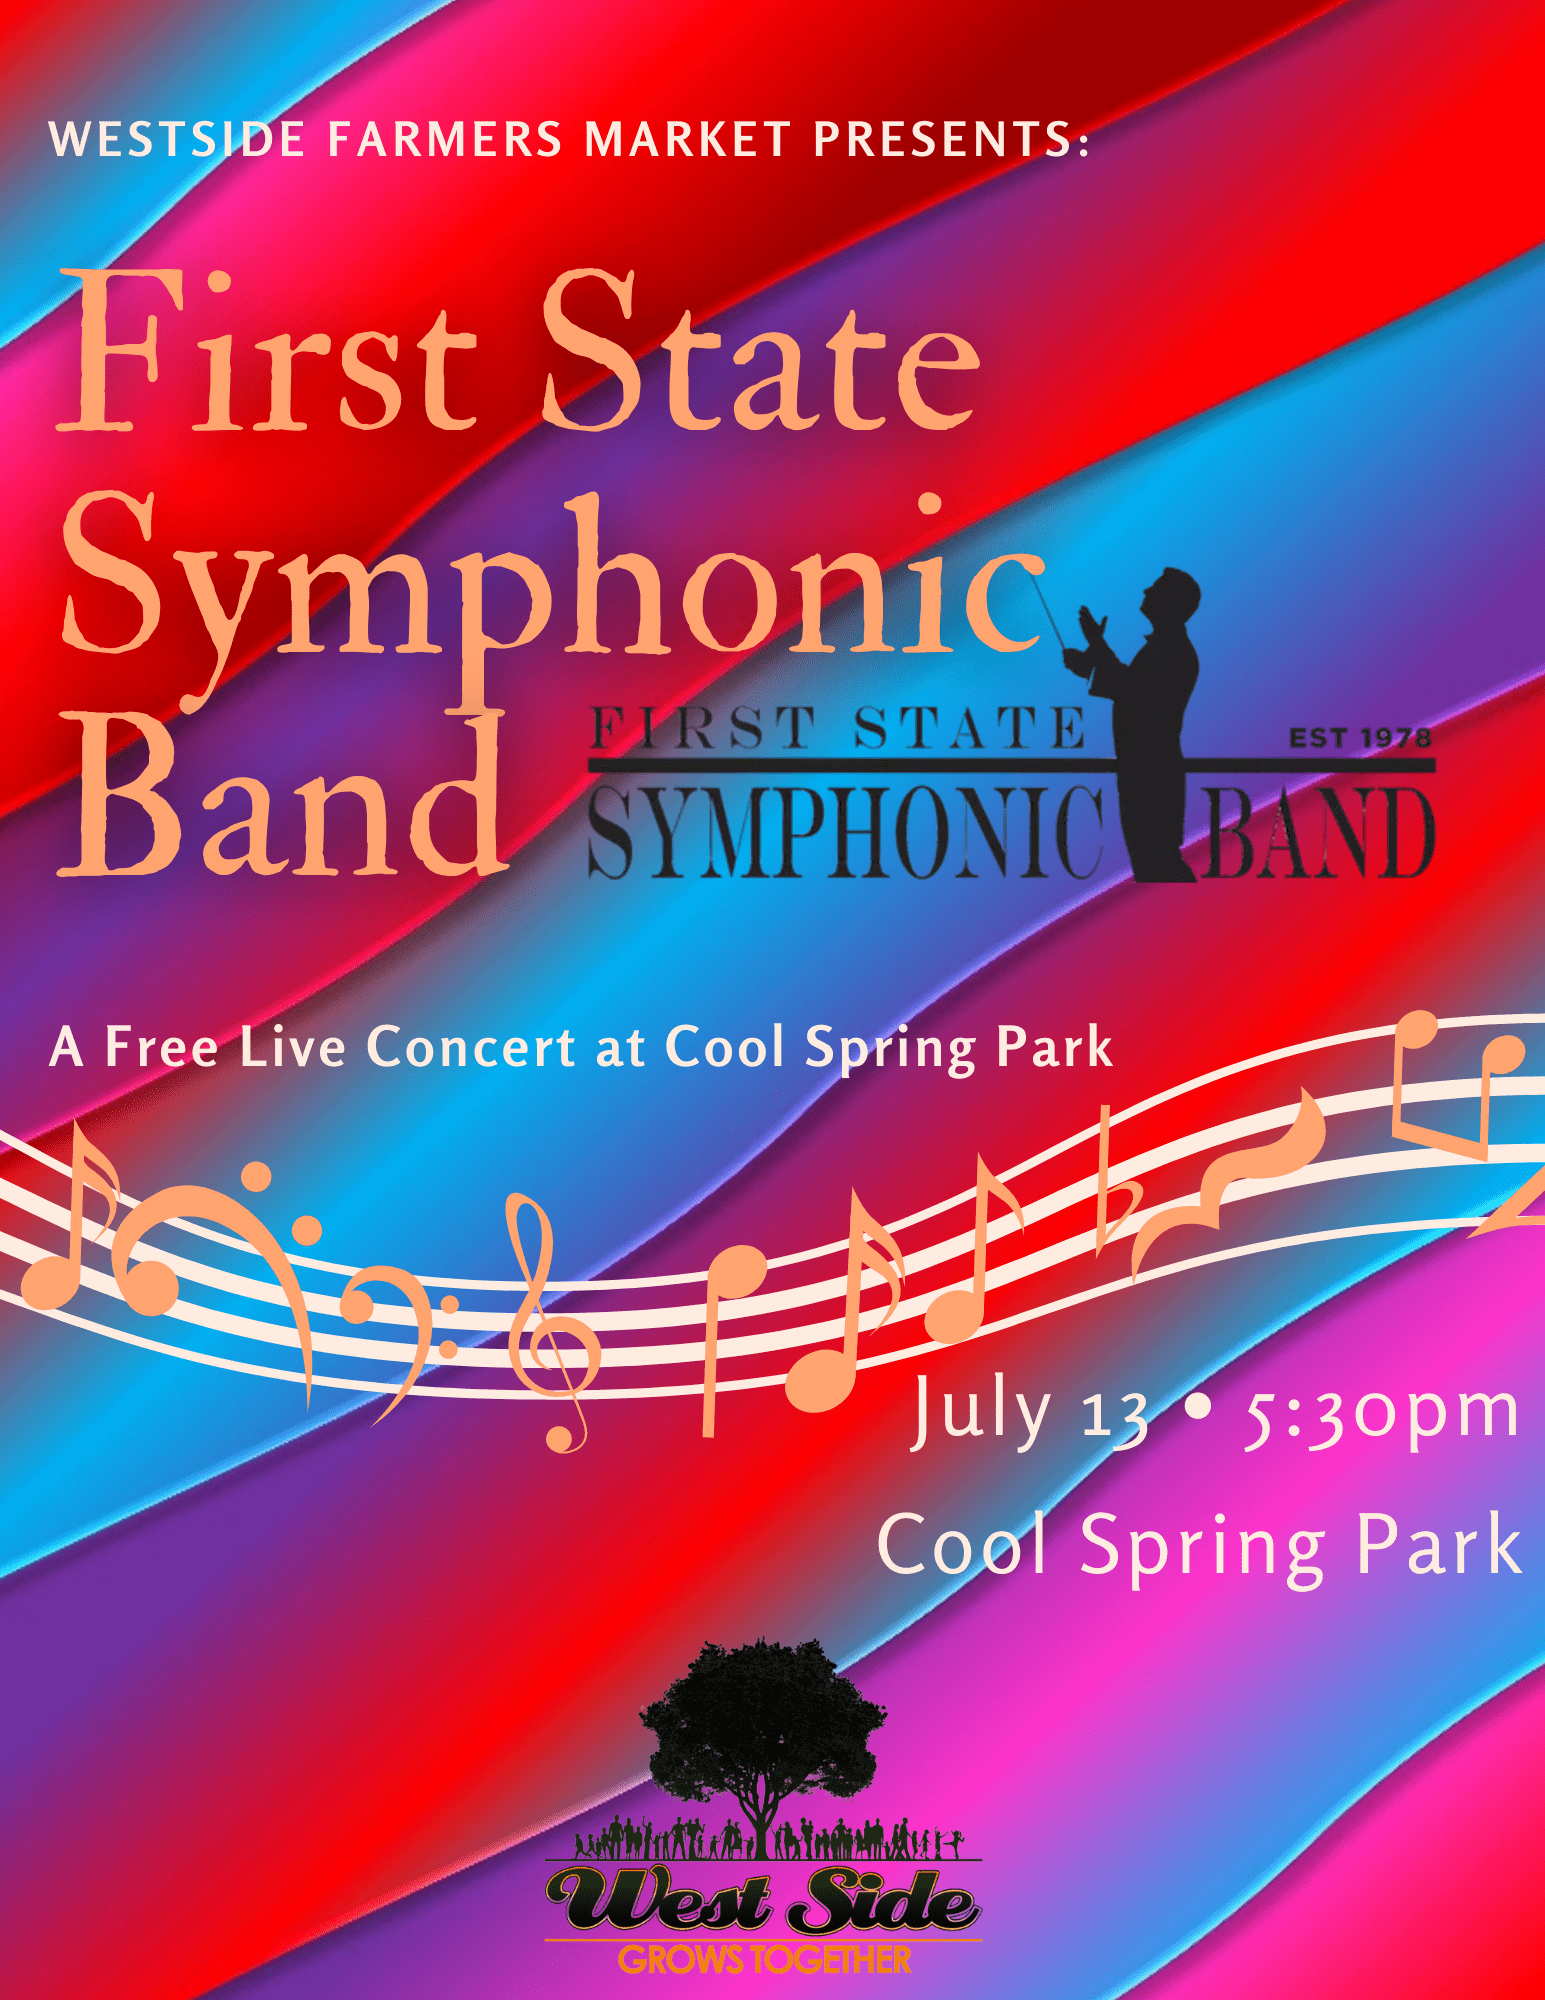 First State Symphonic Band Concert at Farmers Market Flyer